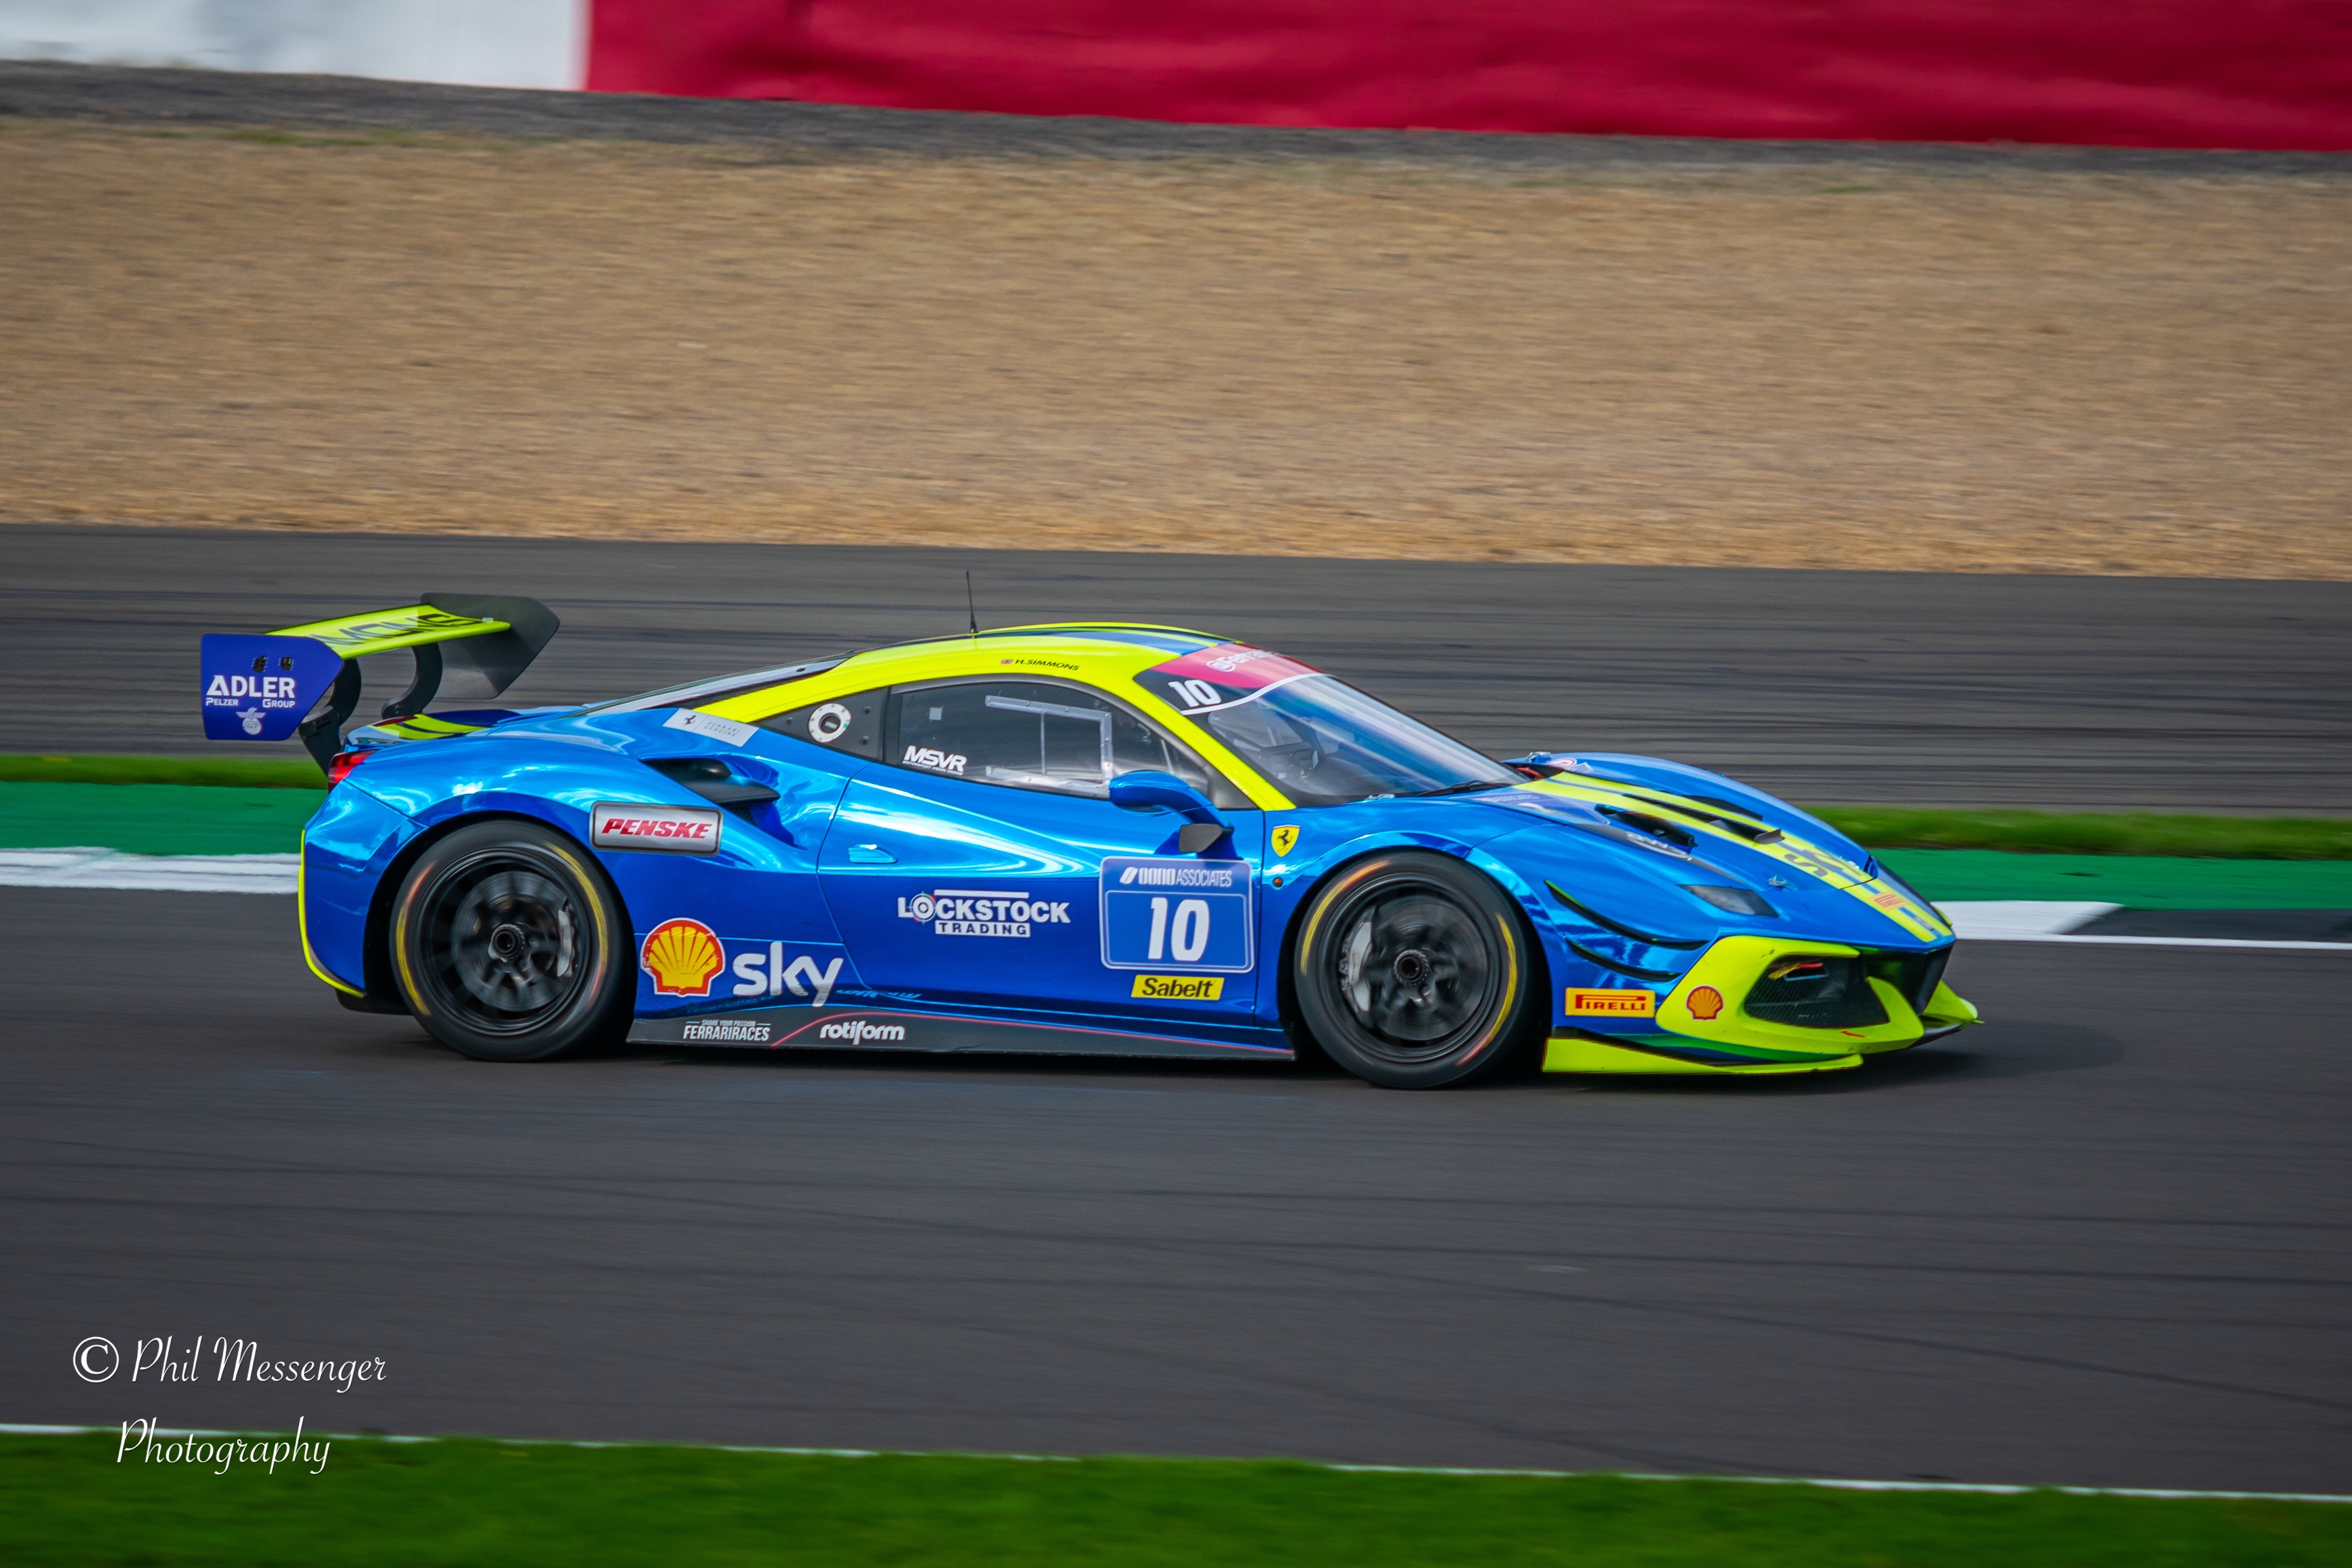 racing cars from Ferrari challenge uk at Silverstone